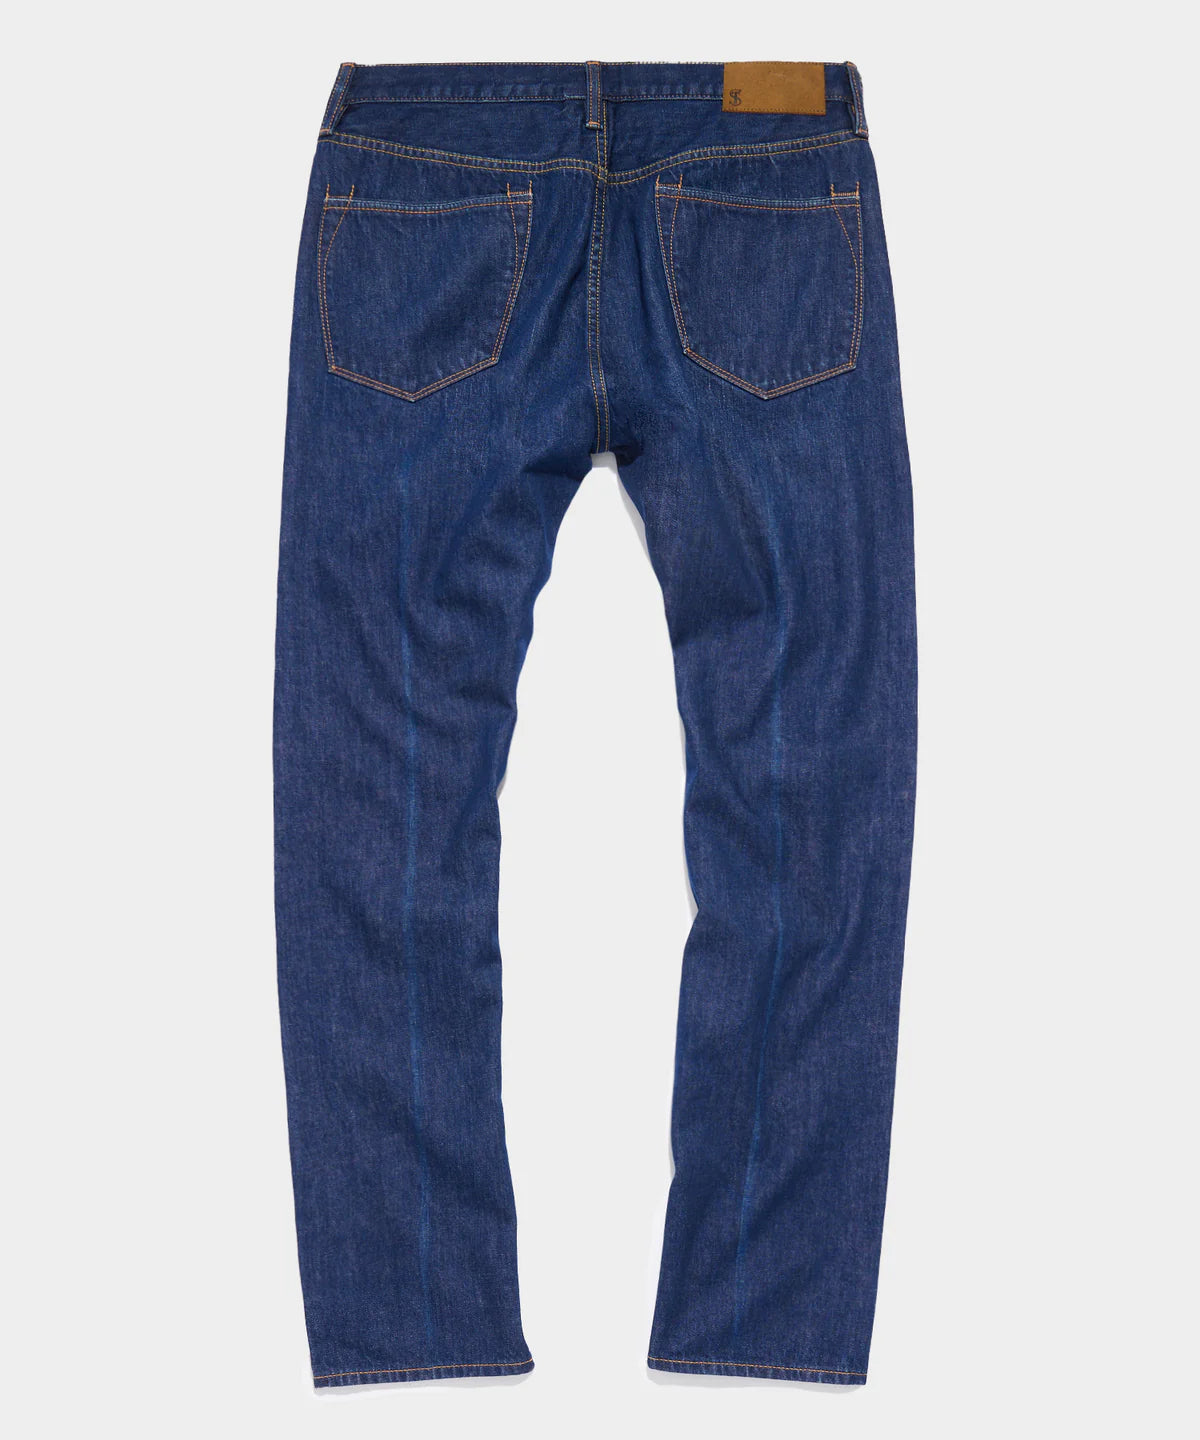 TODD SNYDER CLASSIC FIT SELVEDGE JEAN IN CREASED MEDIUM WASH